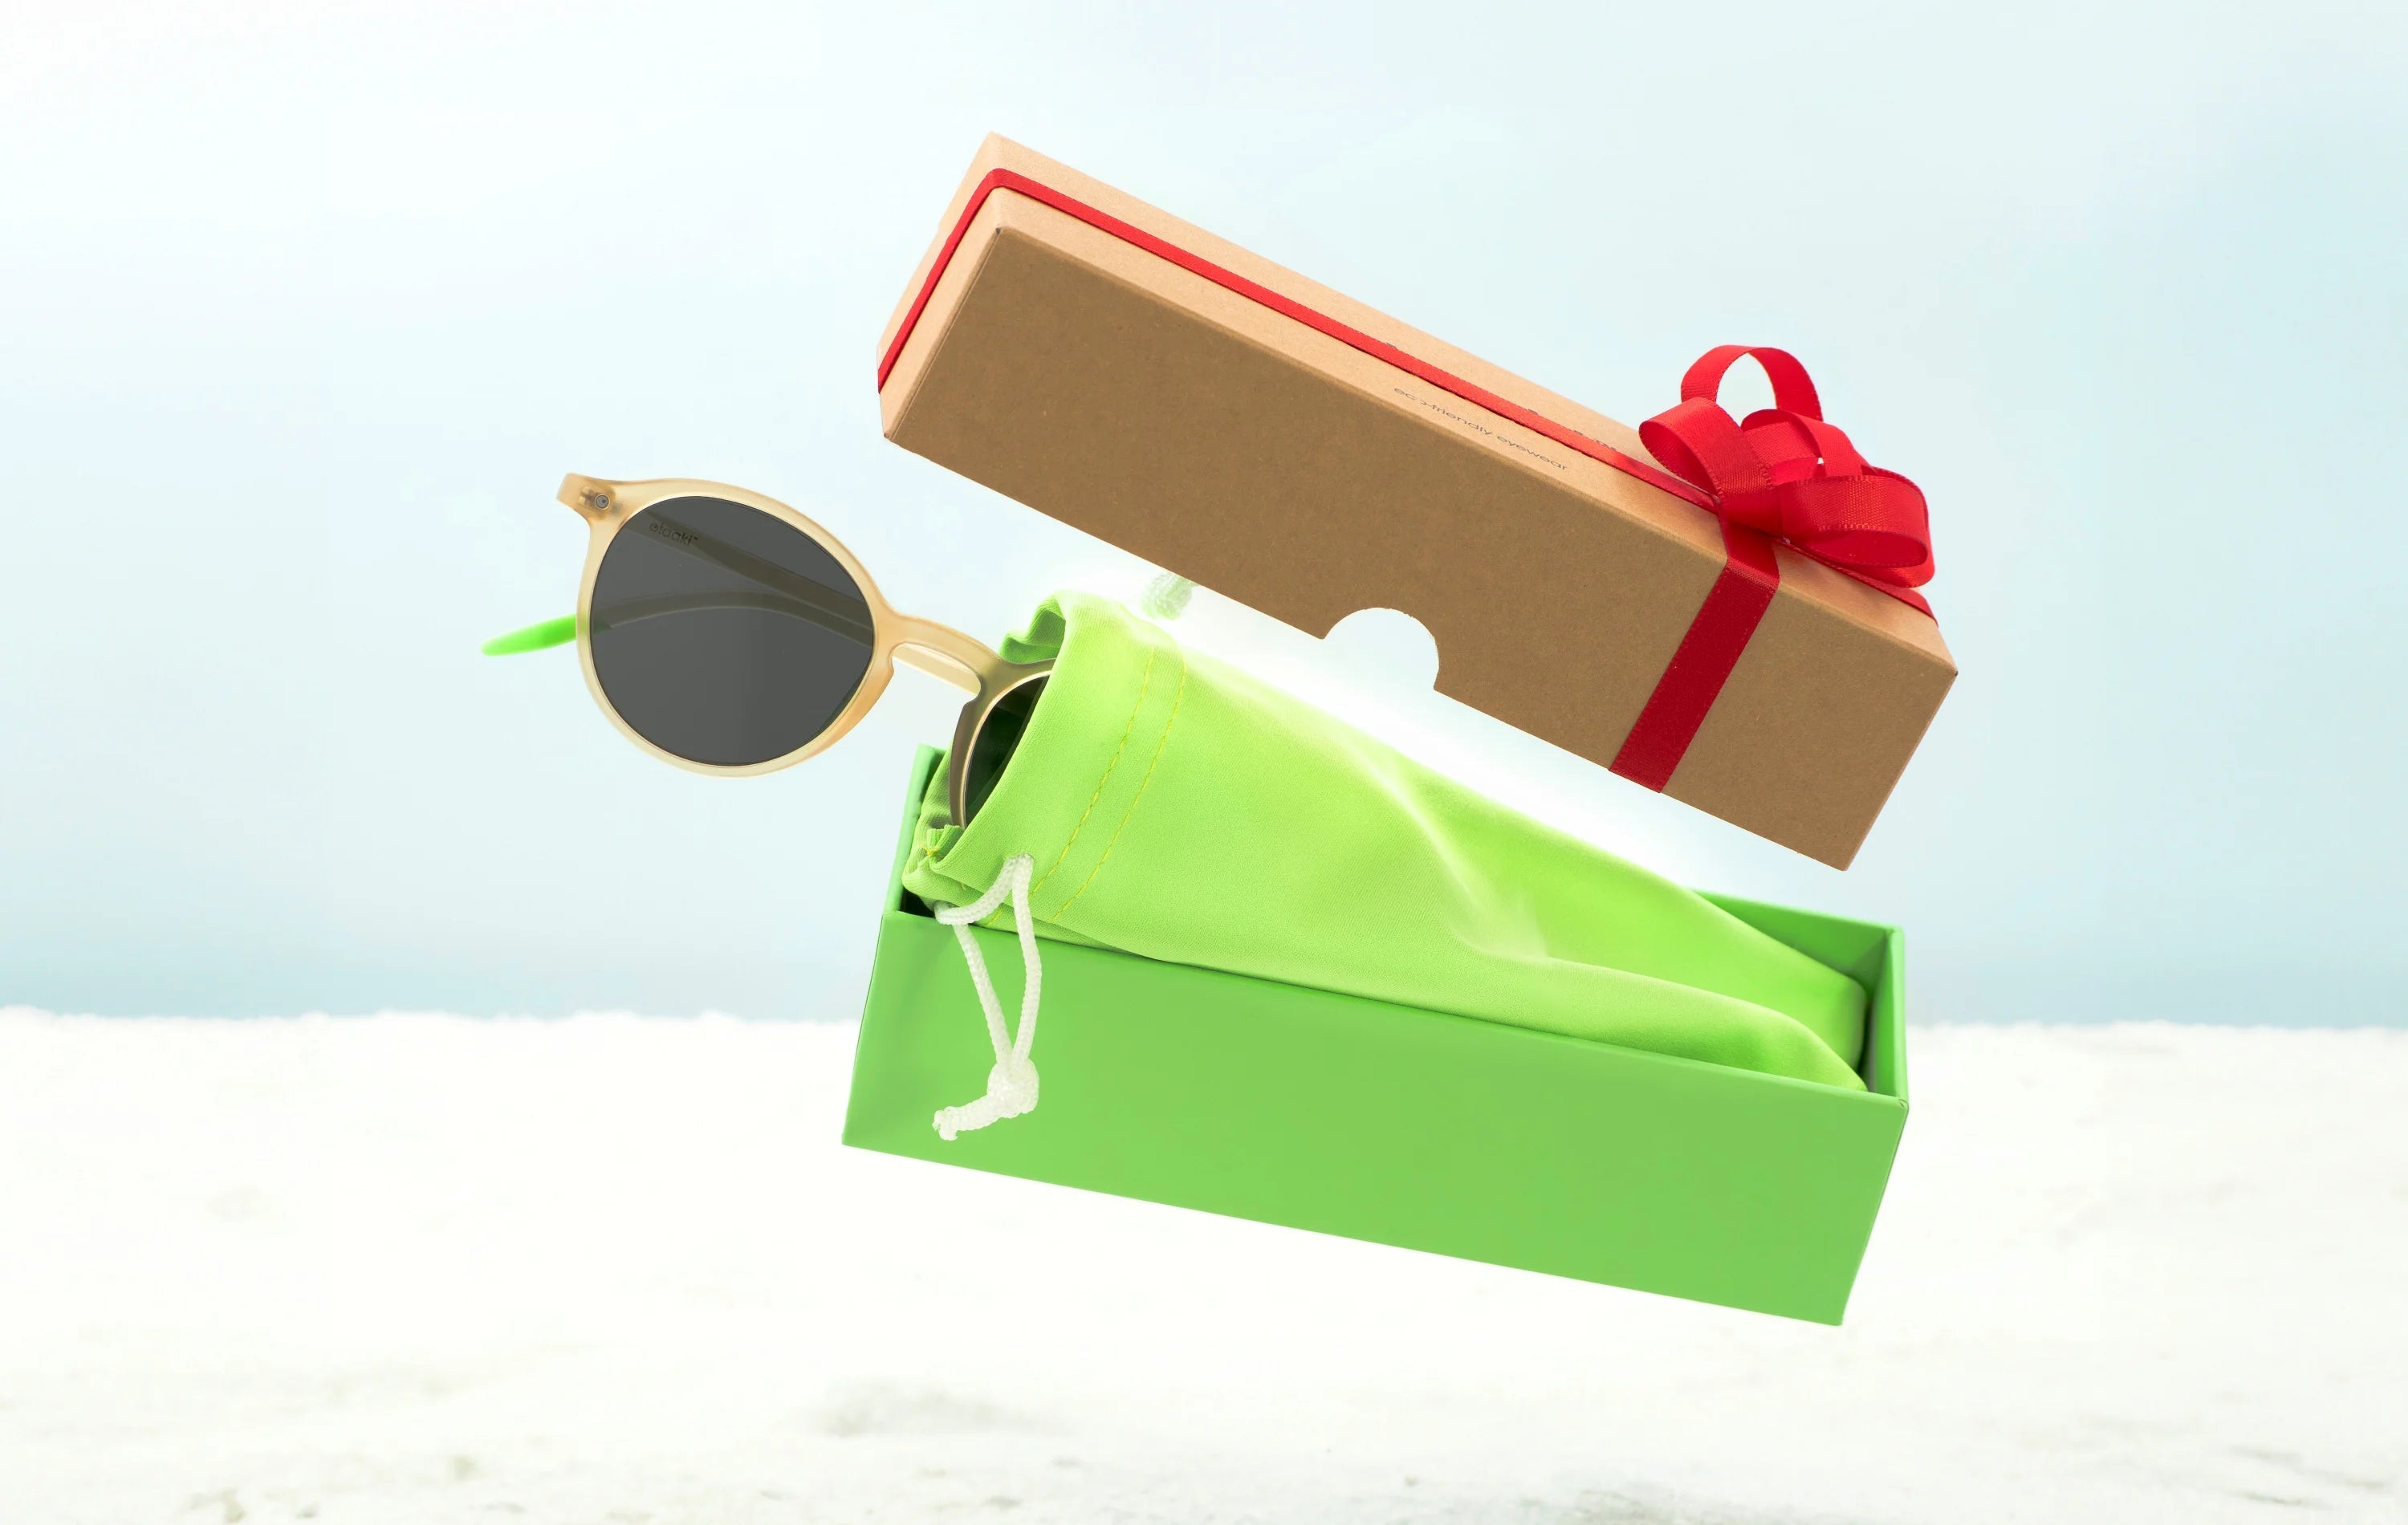 A pair of sunglasses, its cardboard packaging, and its microfiber case, all levitating. The cardboard packaging is adorned with a red Christmas ribbon.